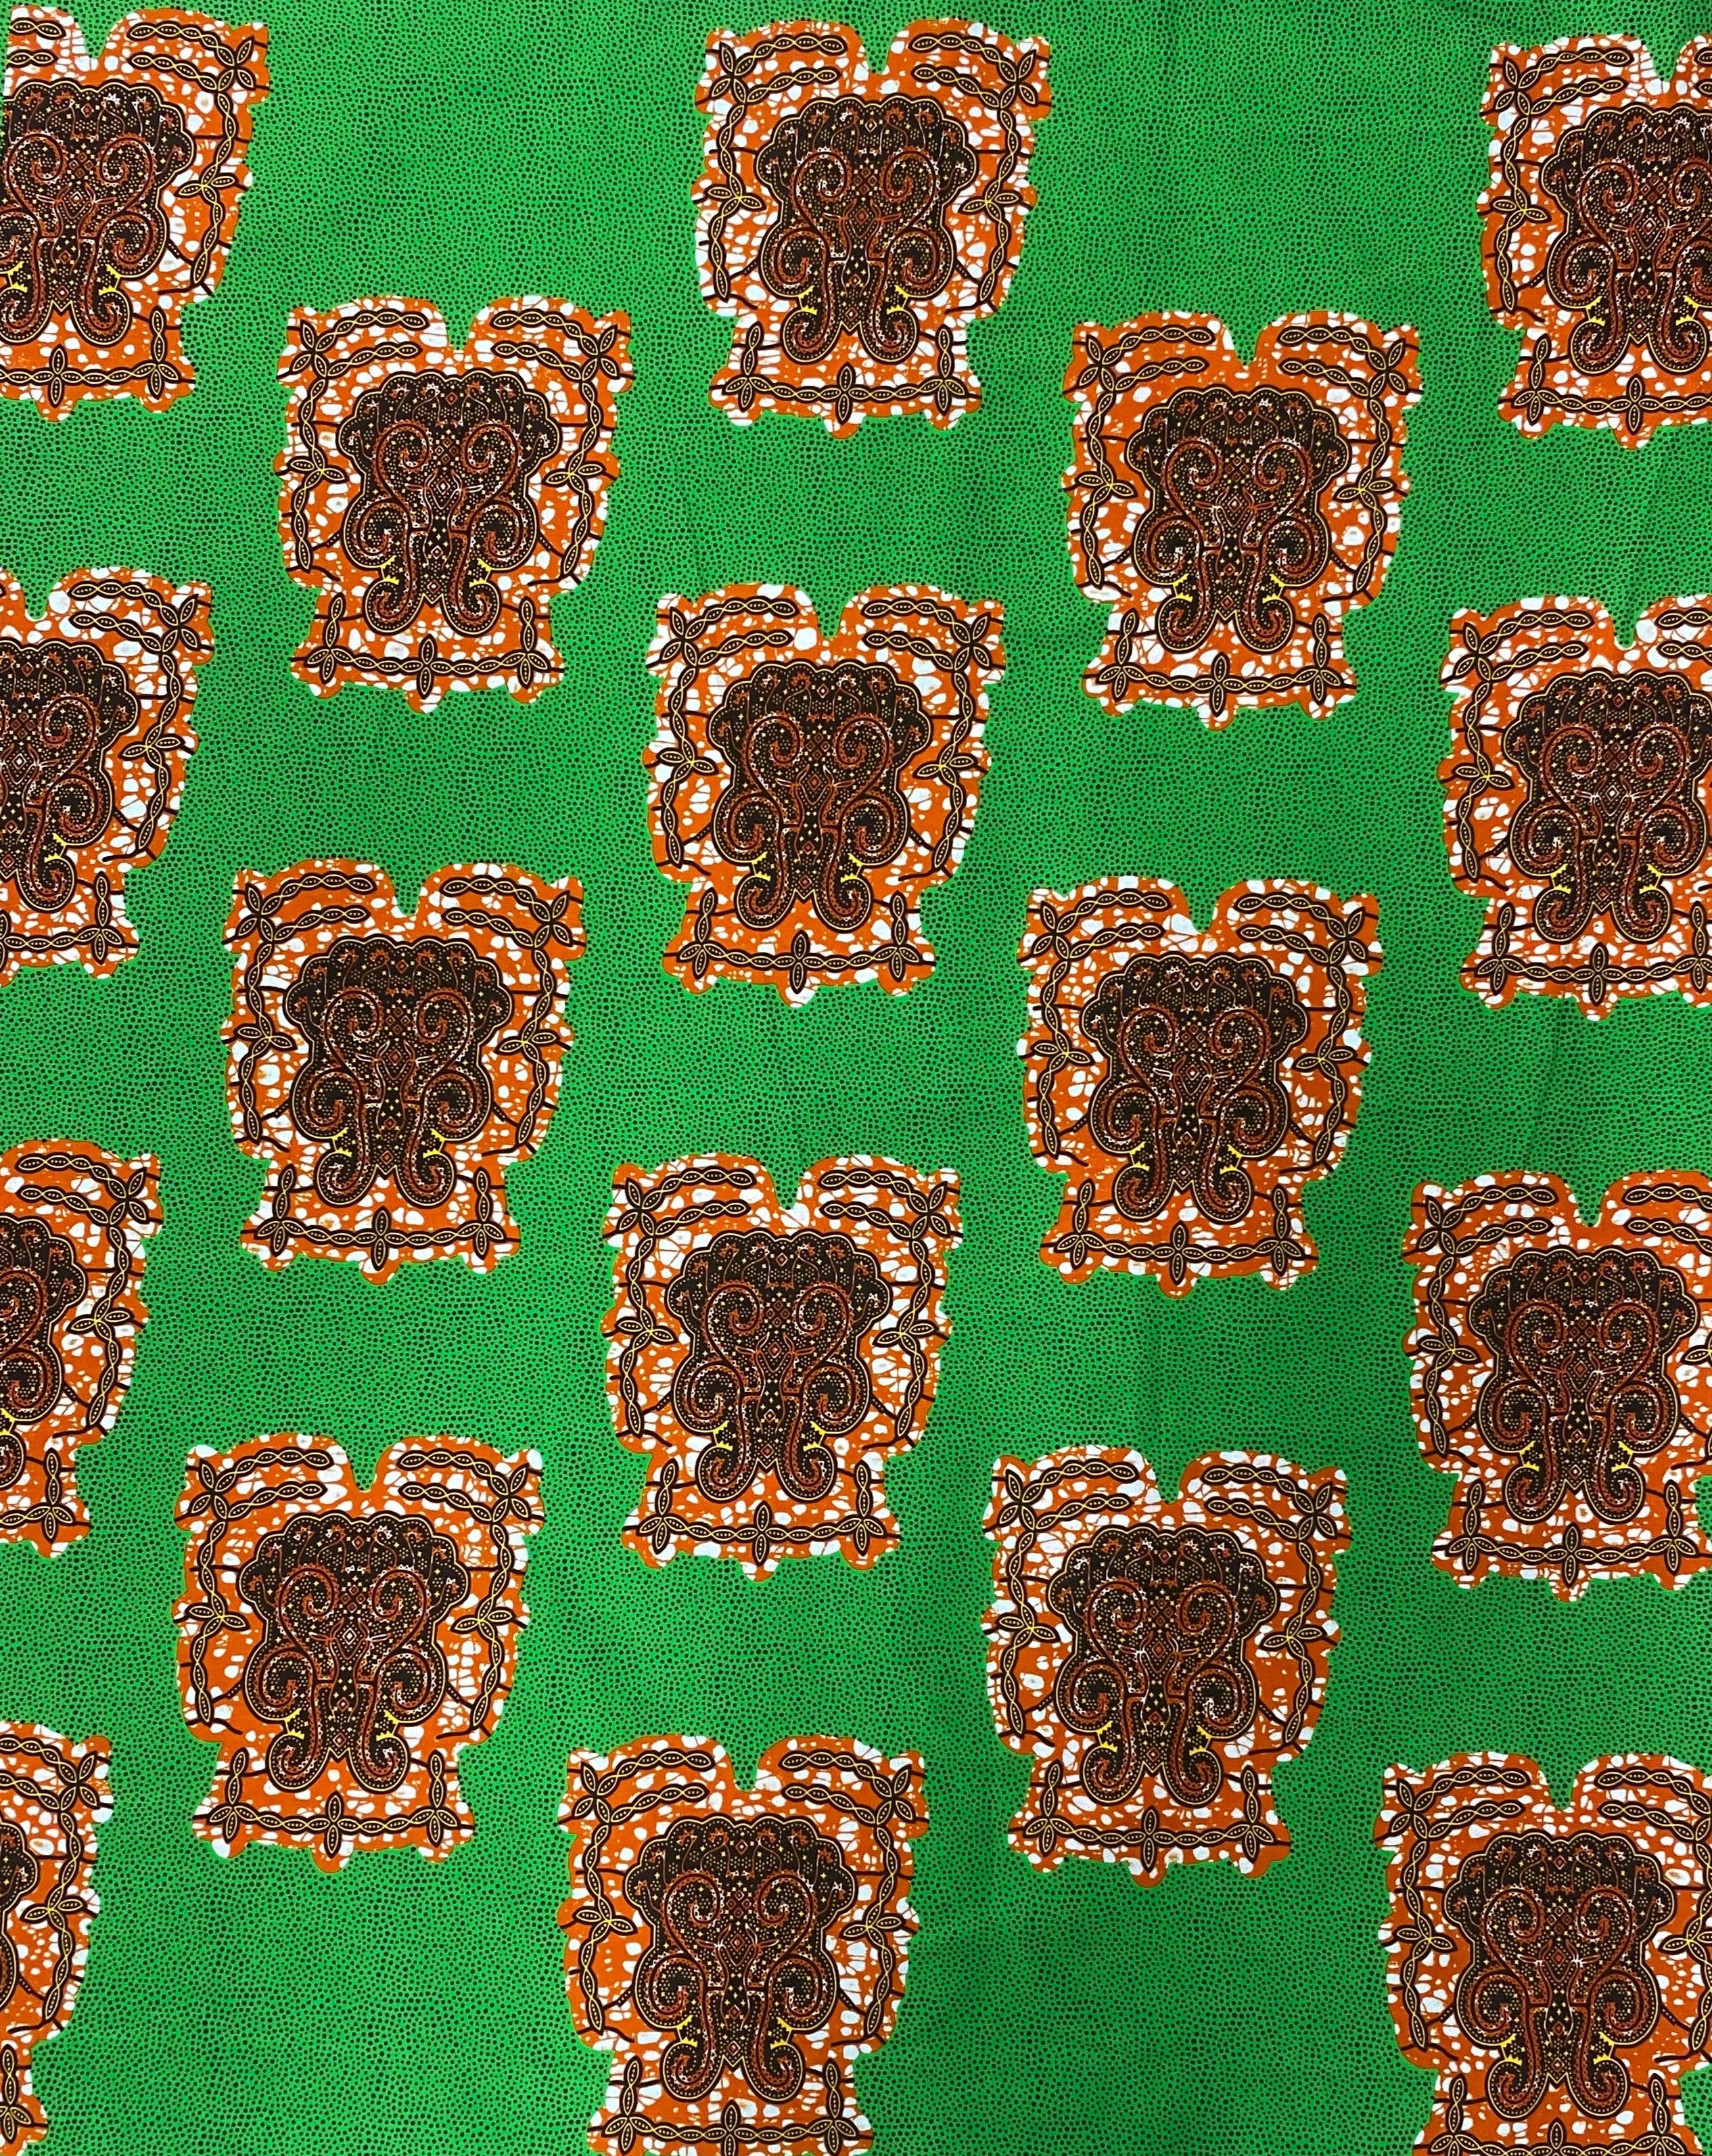 Kelly Green Crest African Print Fabric - 100% Cotton, 44" Wide, Elegantly Vibrant